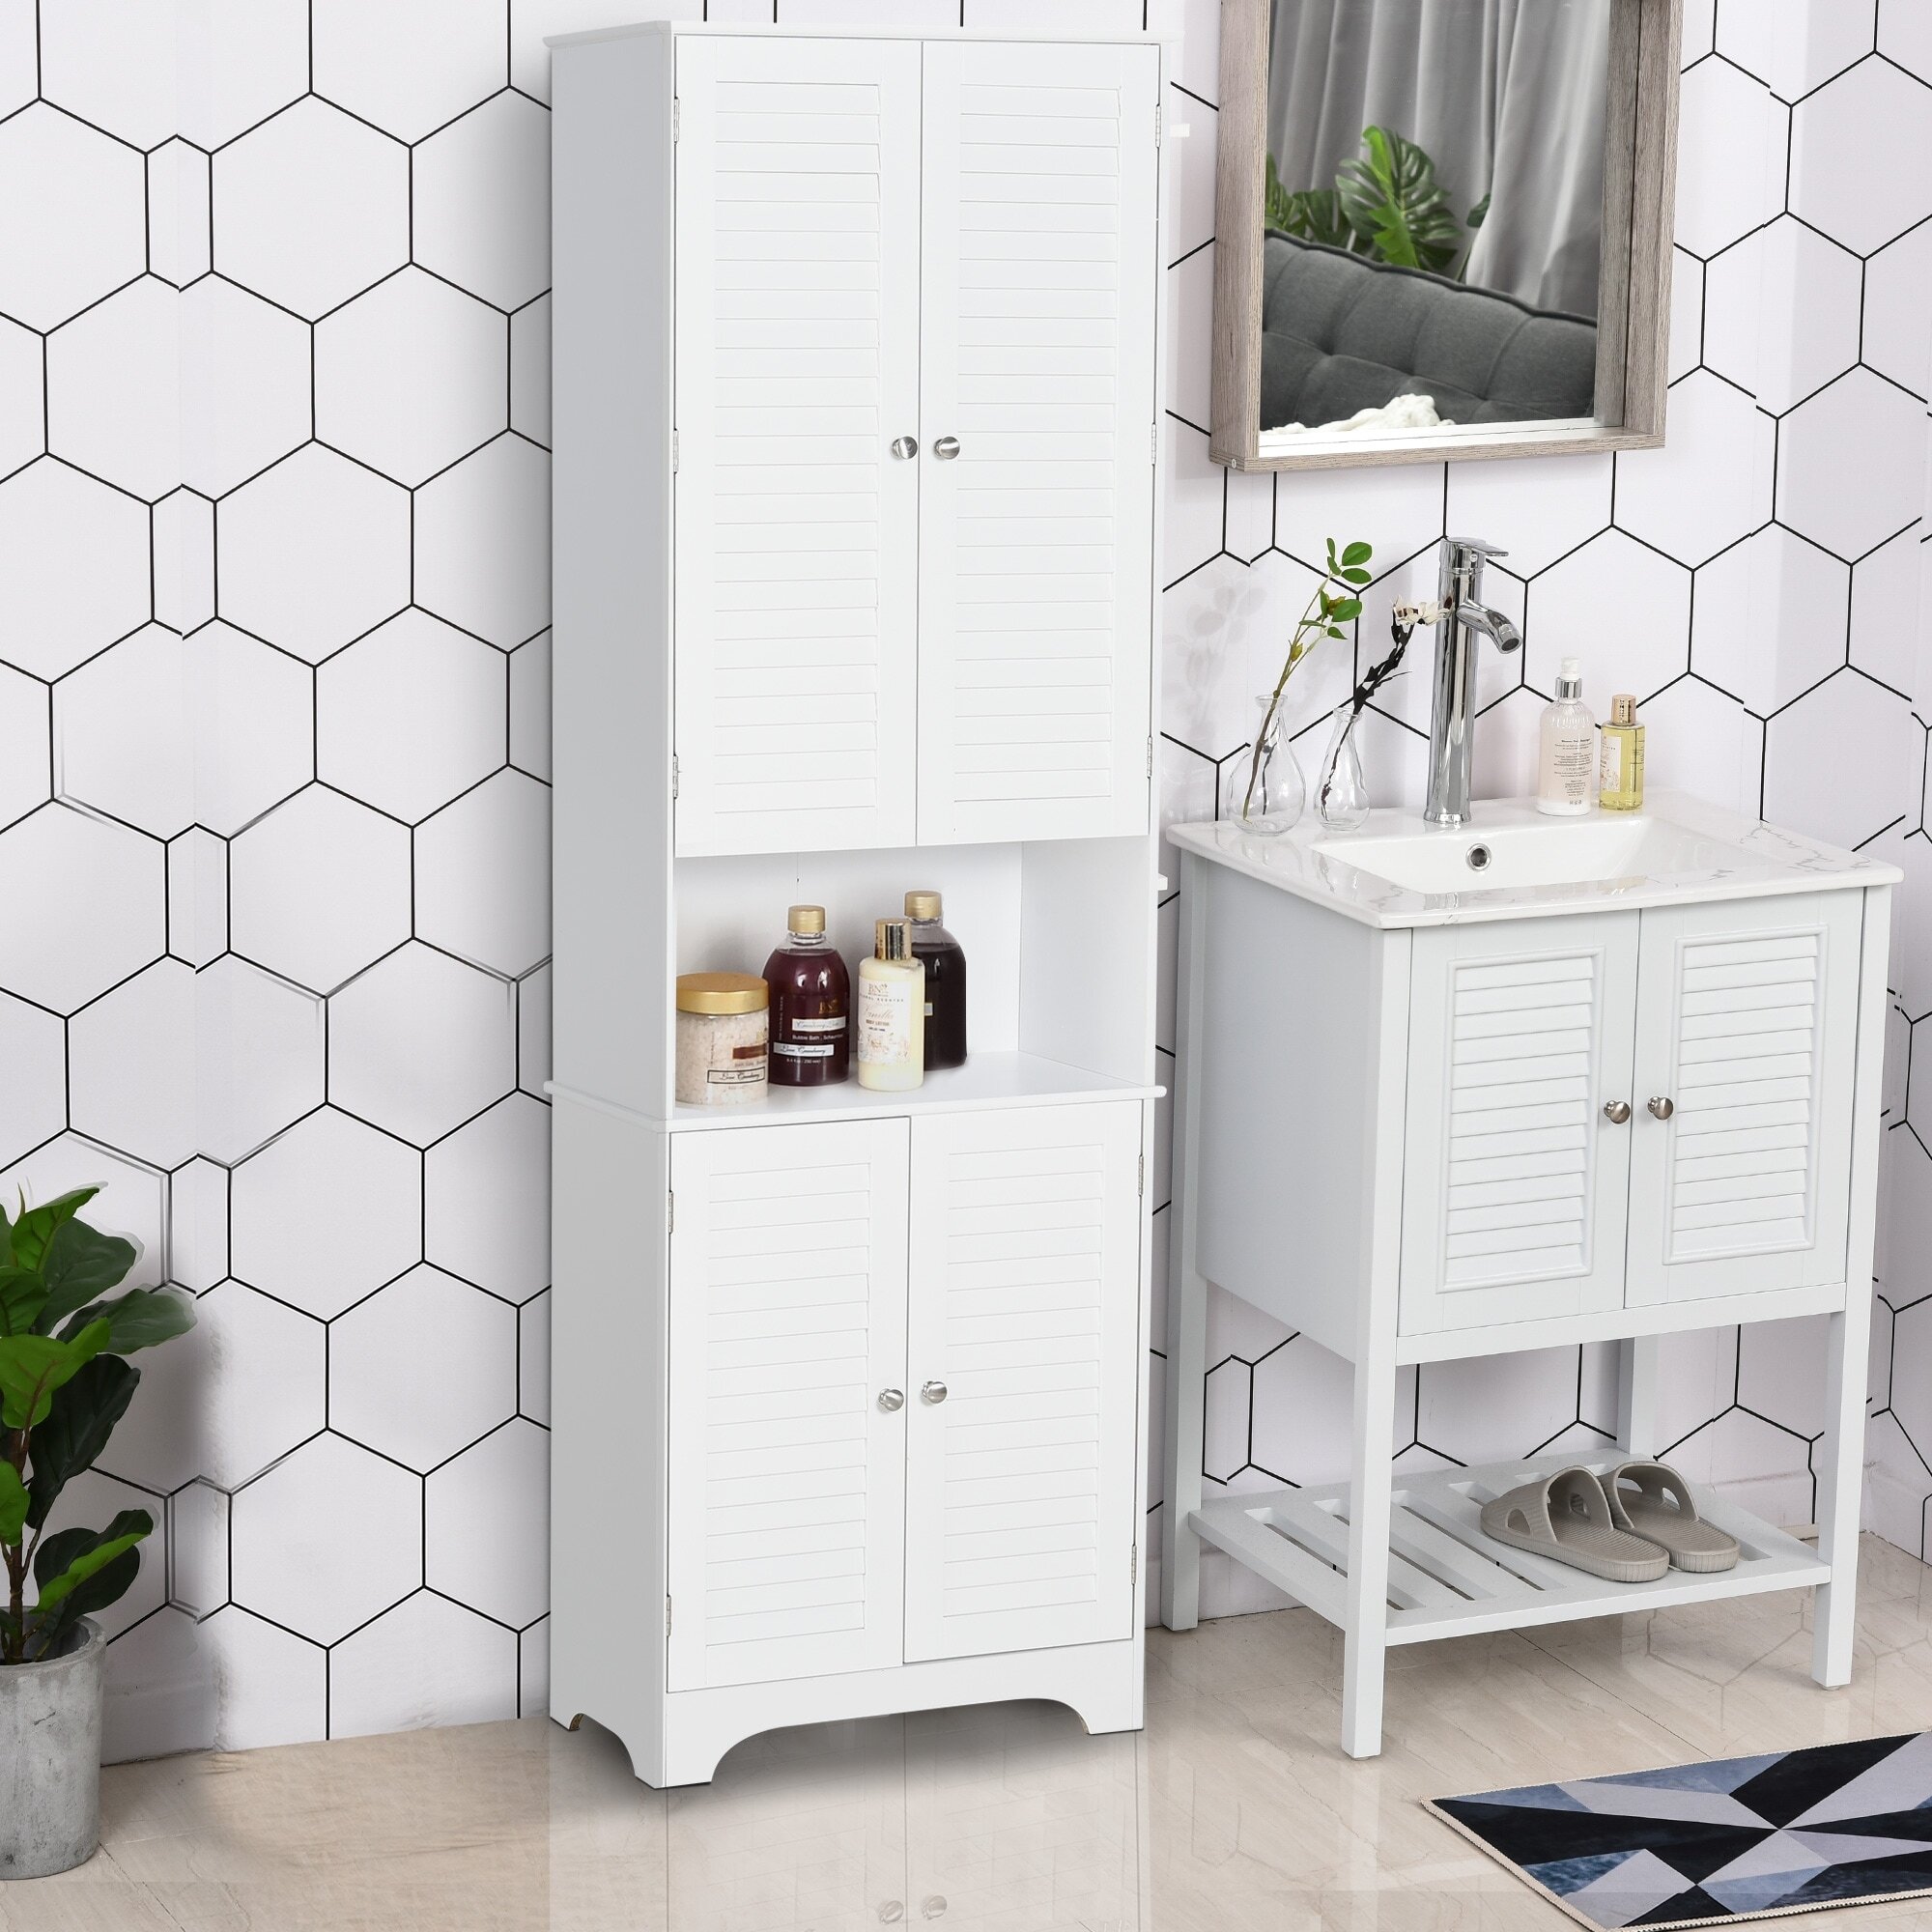 A light, breezy, vented bathroom pantry cabinet 